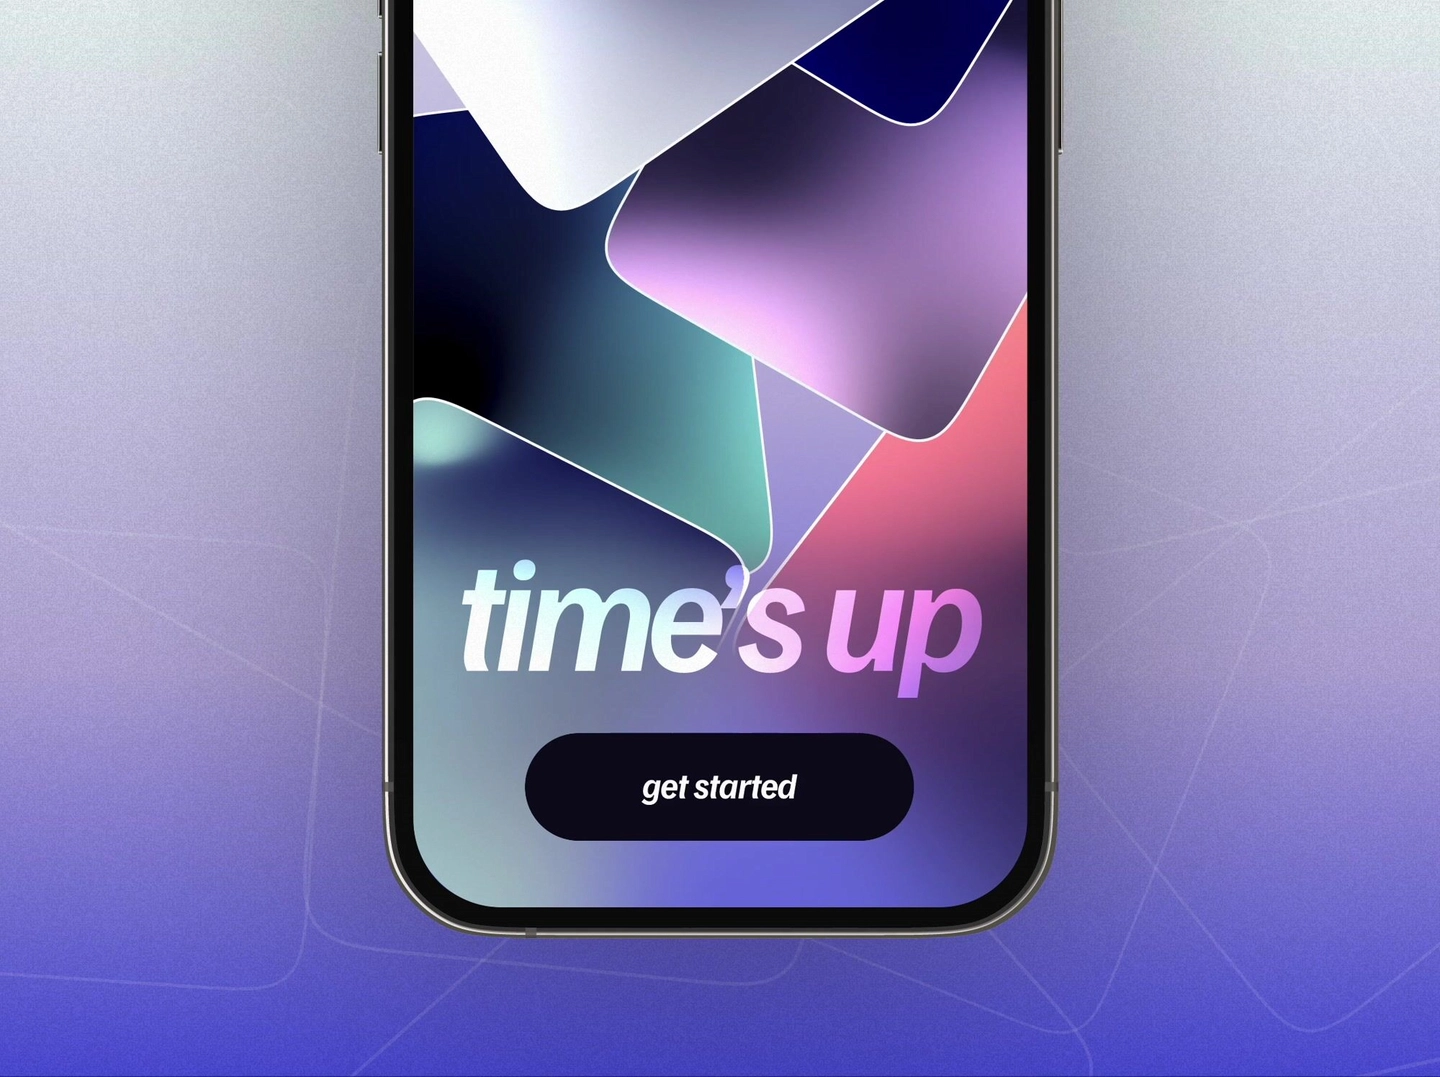 Hypnotic welcome screen for Time's Up game